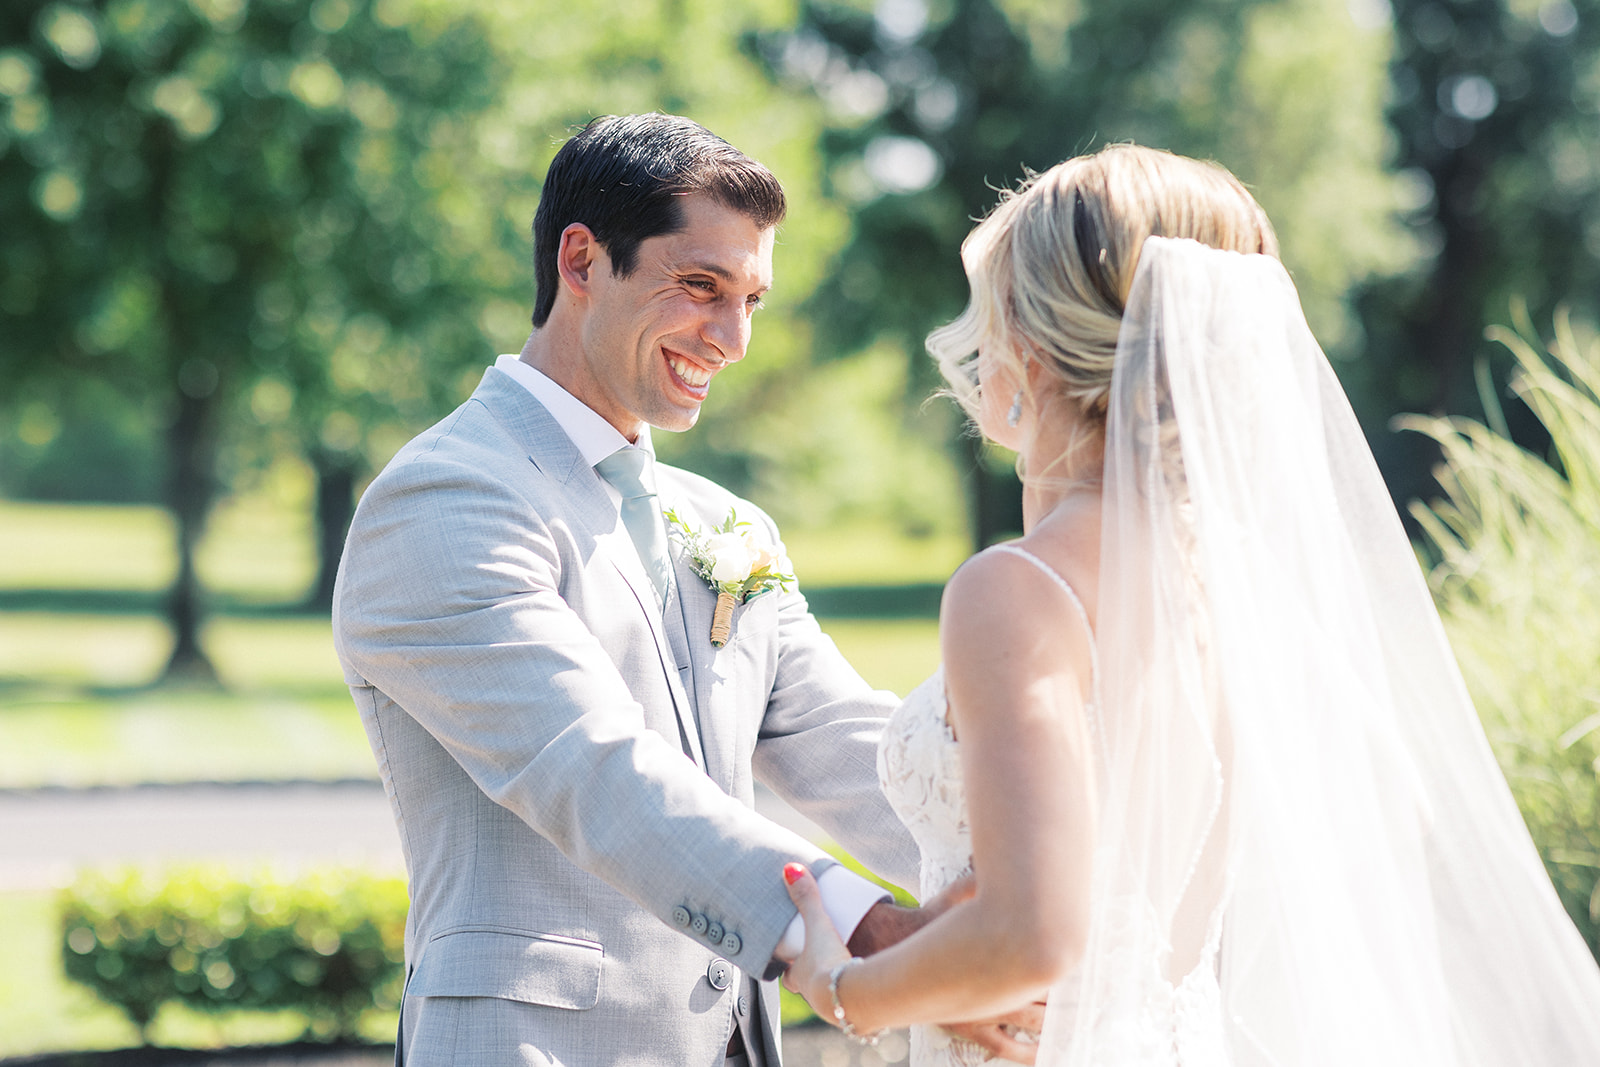 Newlyweds share a happy moment while standing in a garden